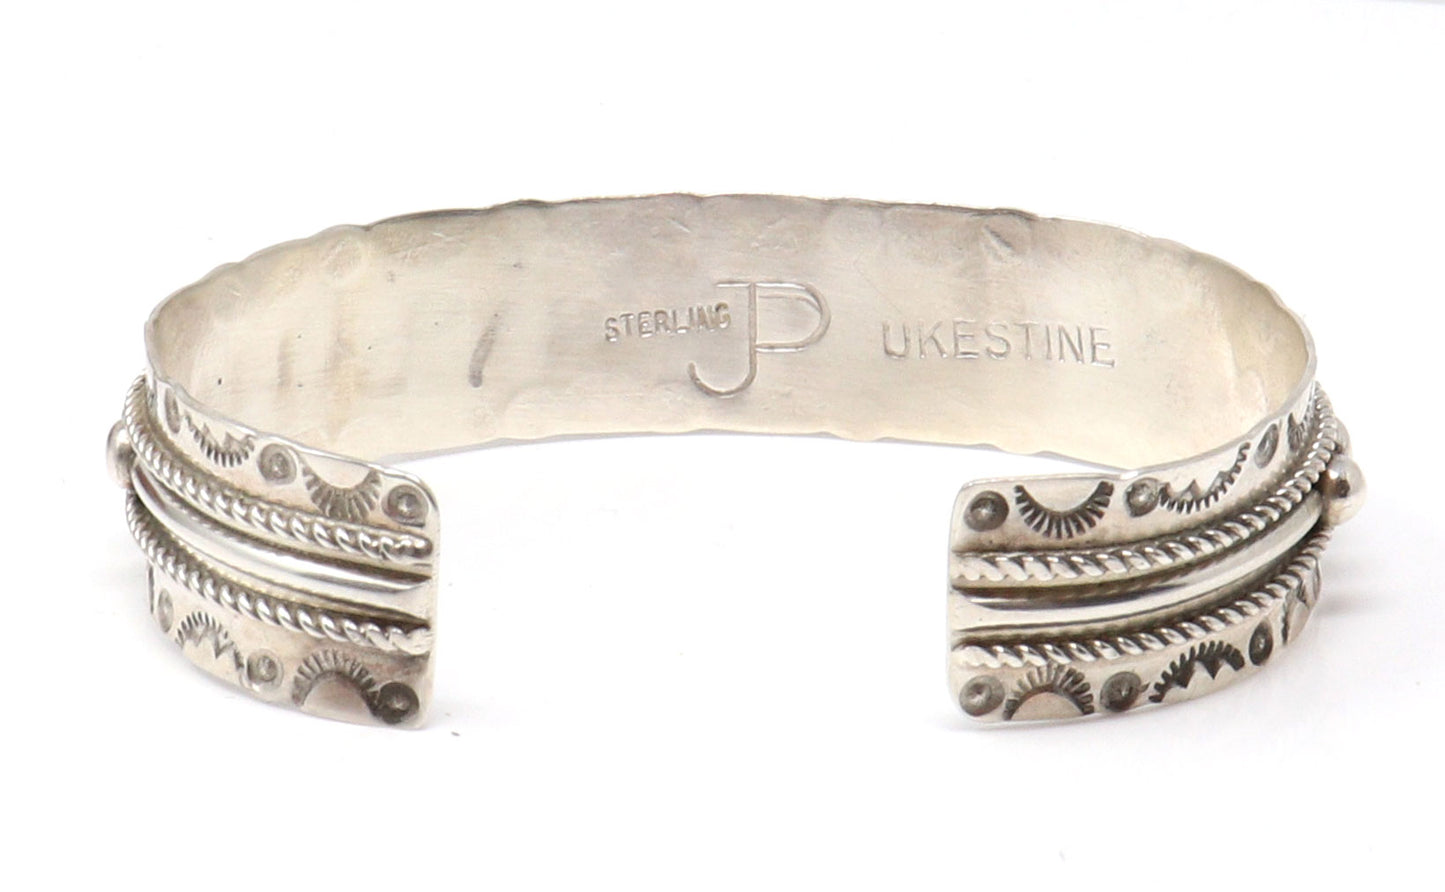 Load image into Gallery viewer, Sterling Silver Bead Cuff by Ukestine
